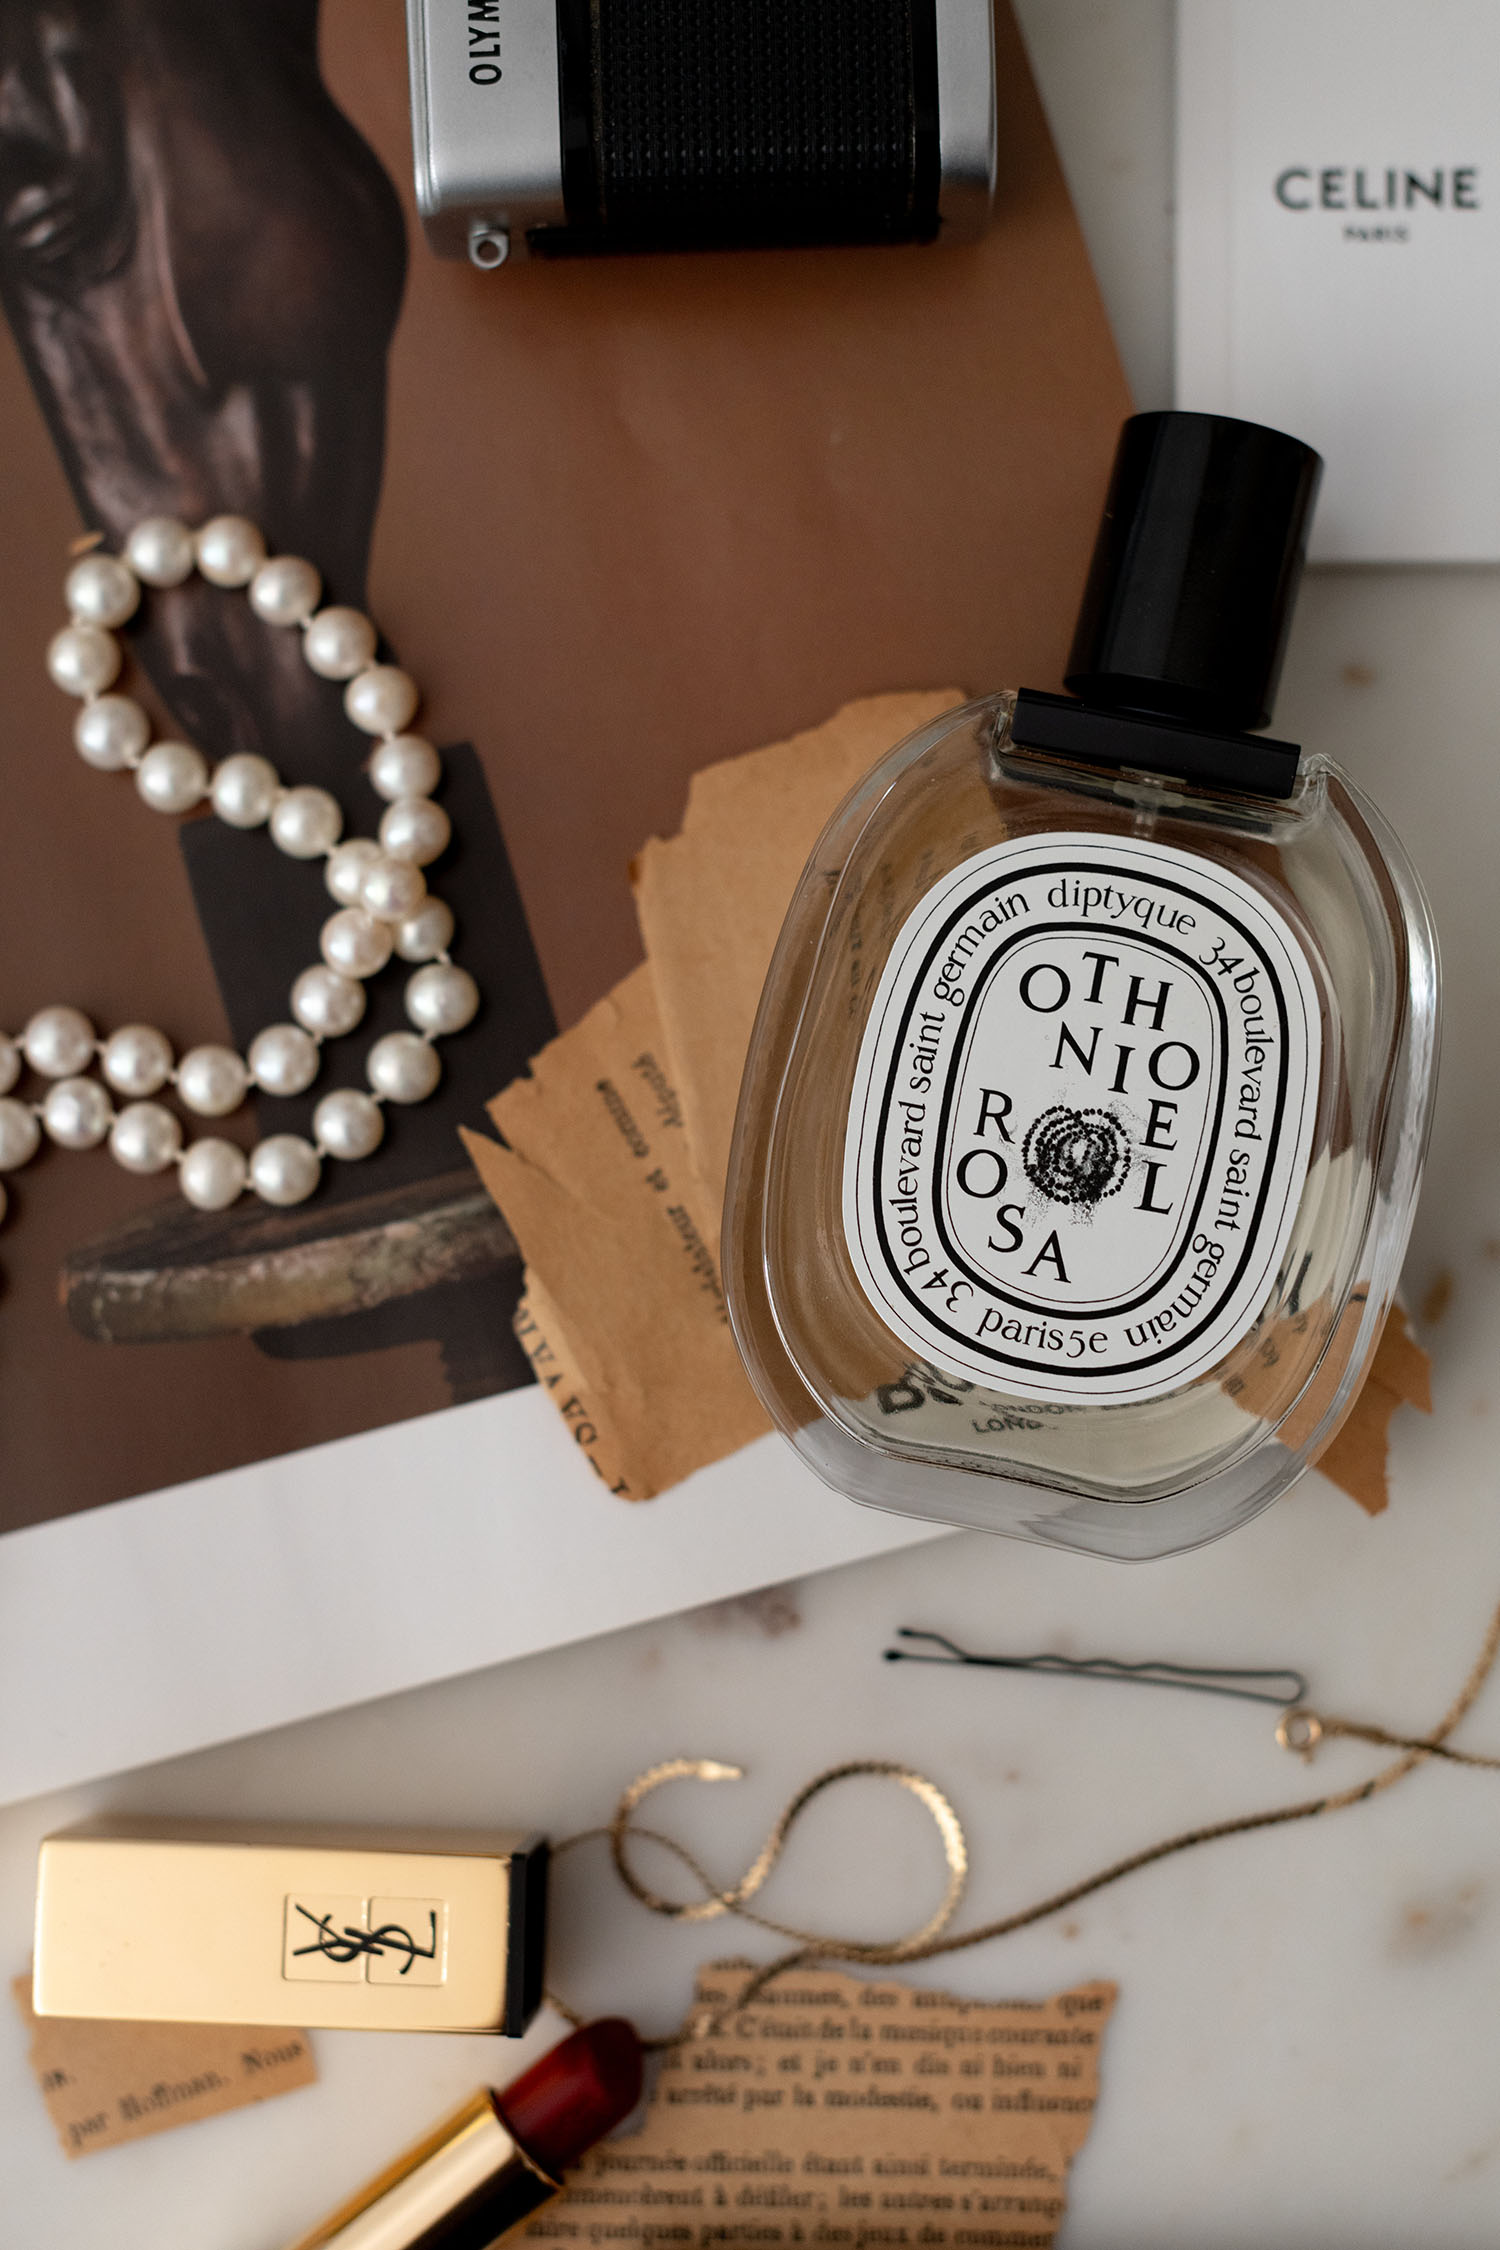 Coco & Voltaire, Diptyque Othoniel Rosa perfume, YSL red lipstick, Pearl necklace